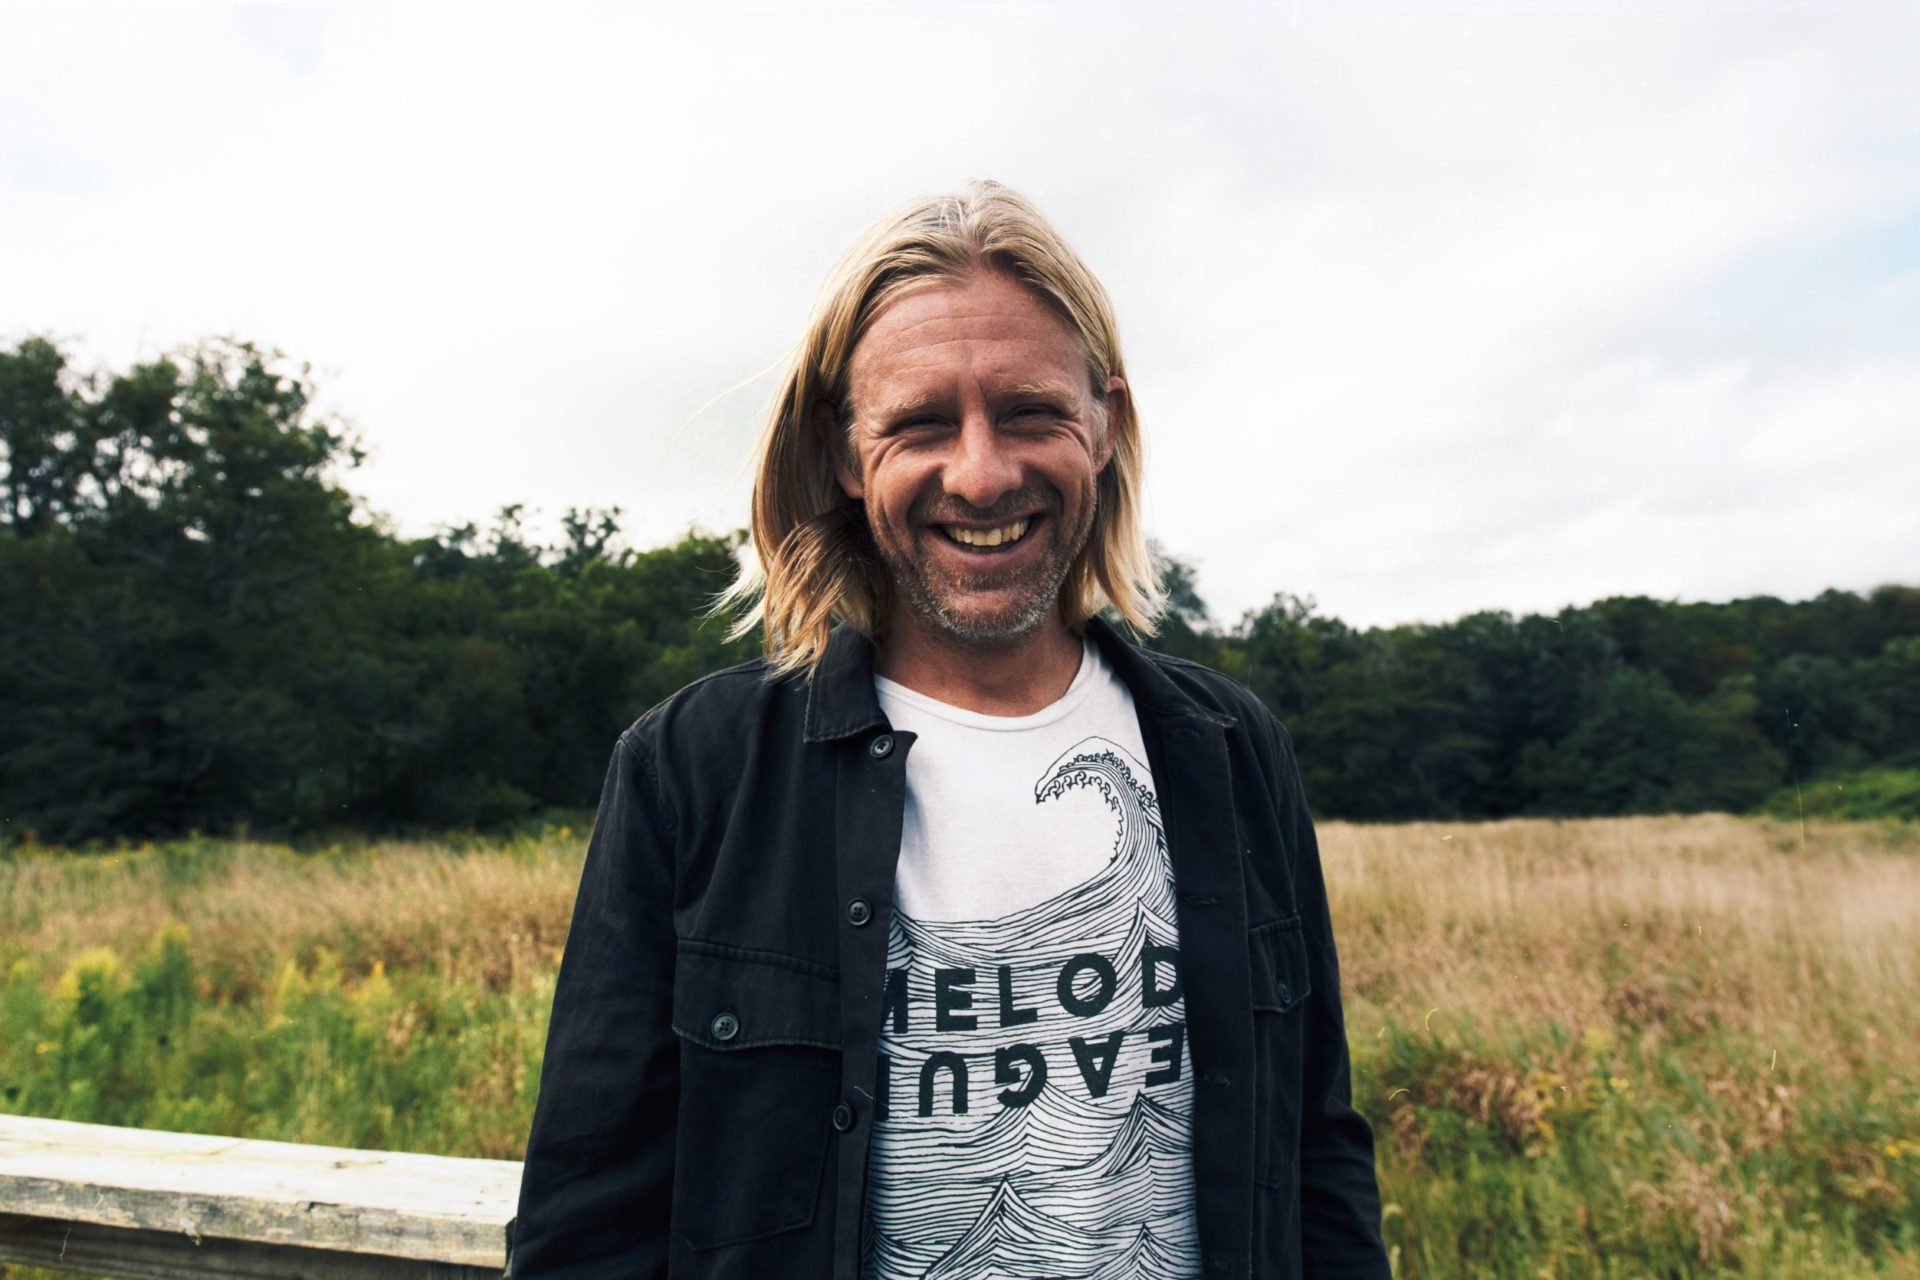 Seeking unity through song: A conversation with Jon Foreman of ...